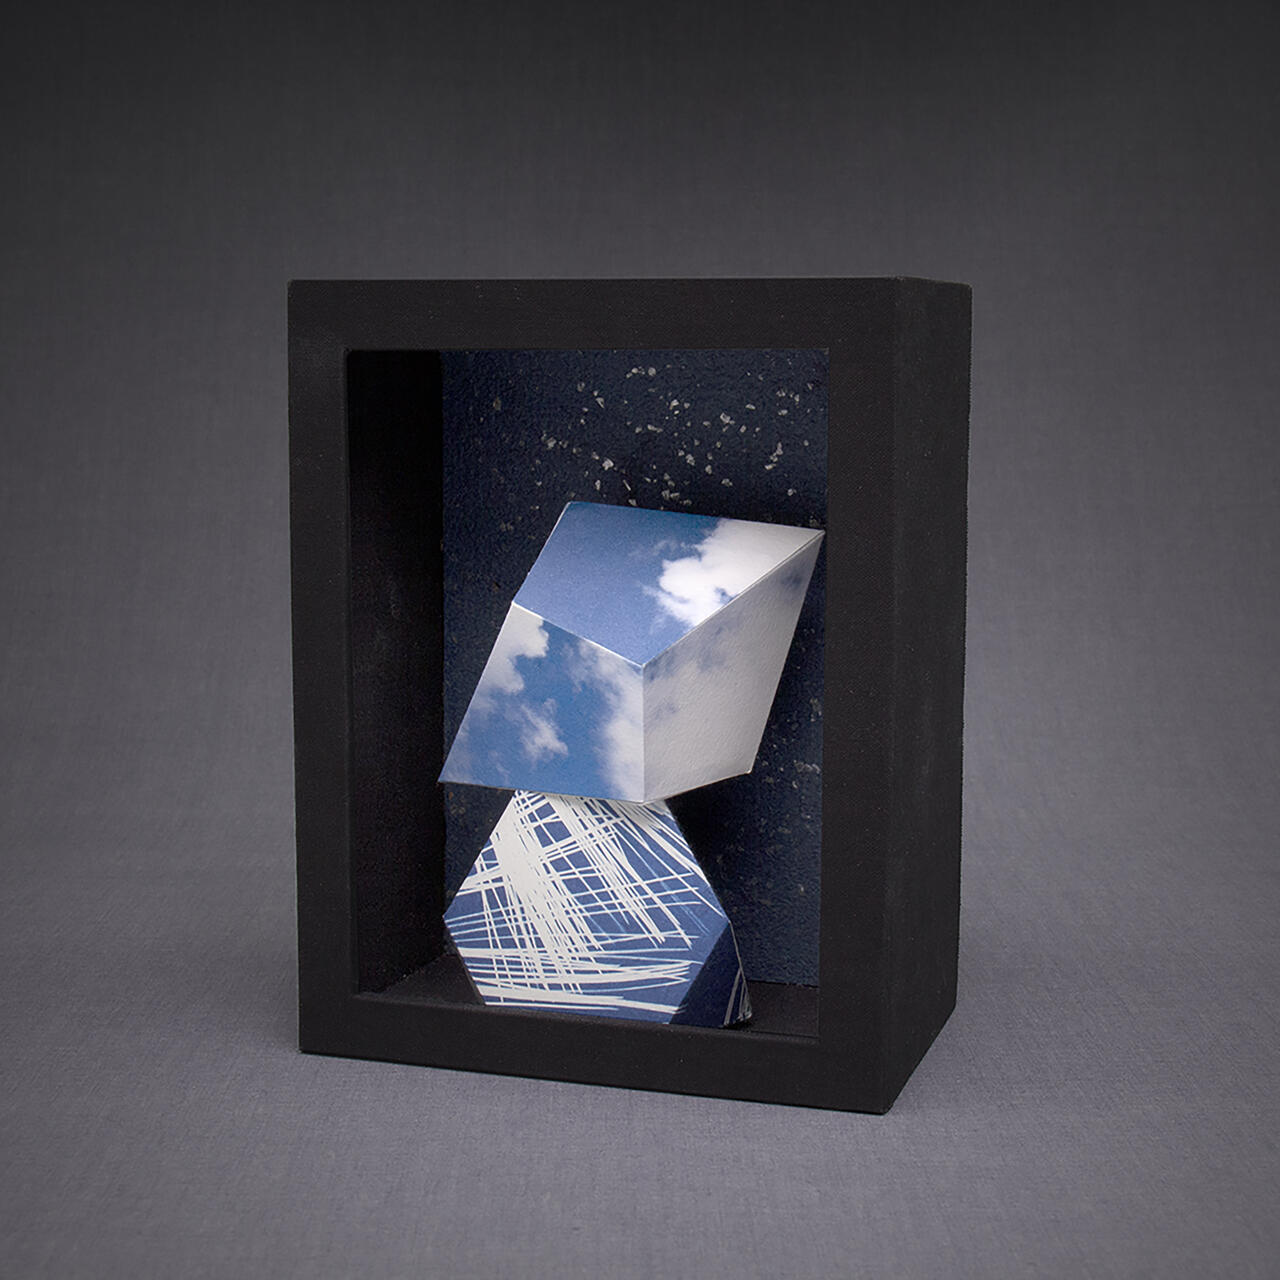 An image showcasing a framed box with two geometric cyanotype objects inside.